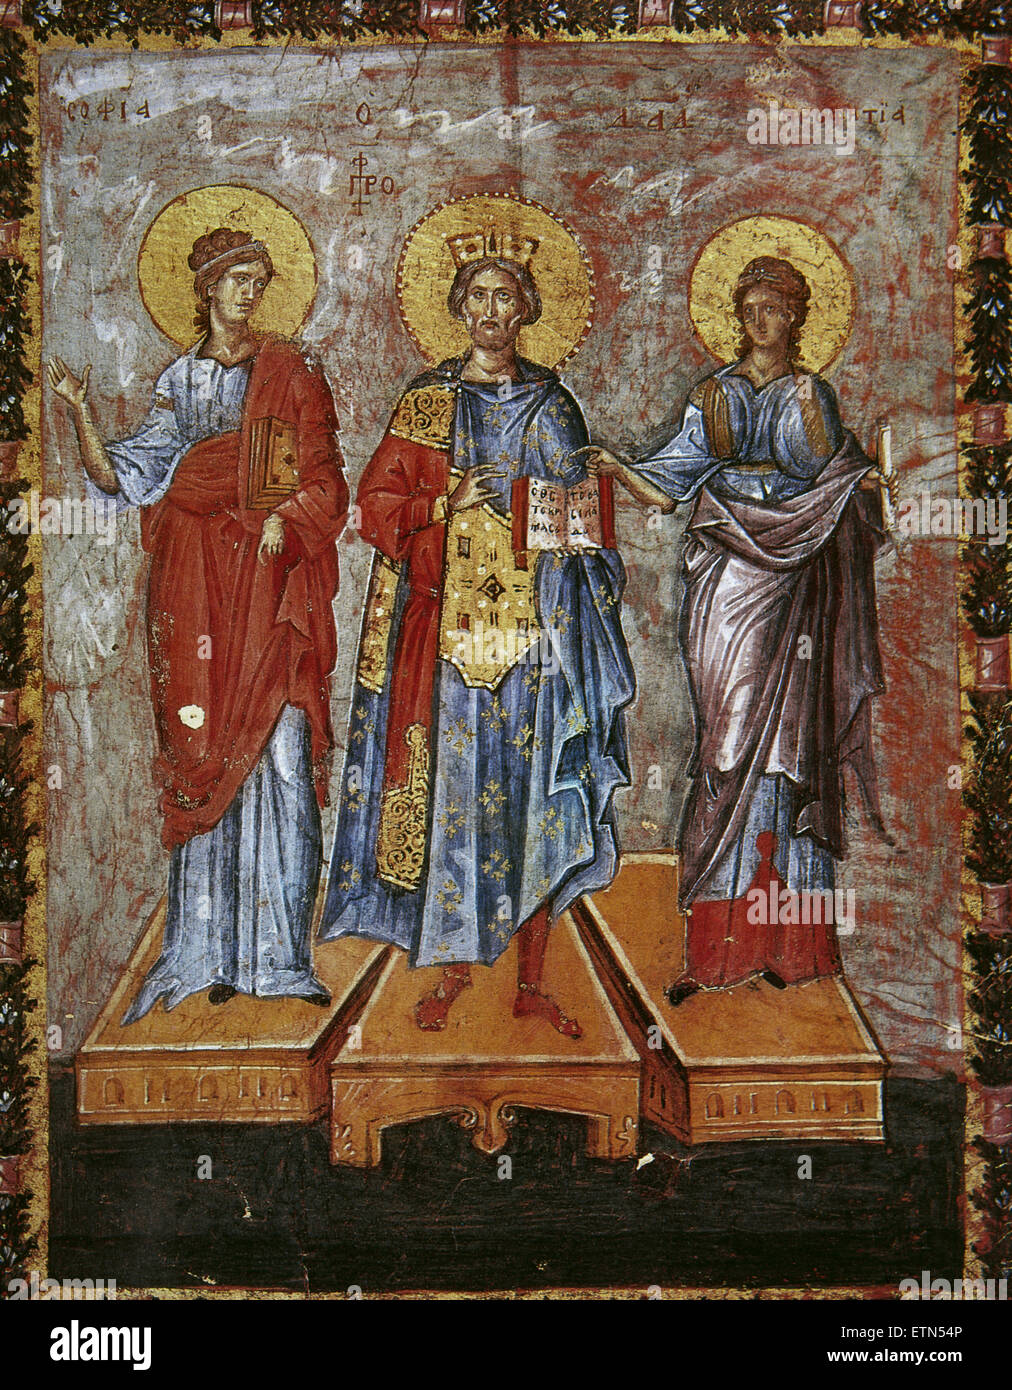 David, prophet and king. Headset and depicted as a Byzantine emperor. Flanked by wisdom and prophecy. Miniature. 13th century. Vatican Library. Stock Photo